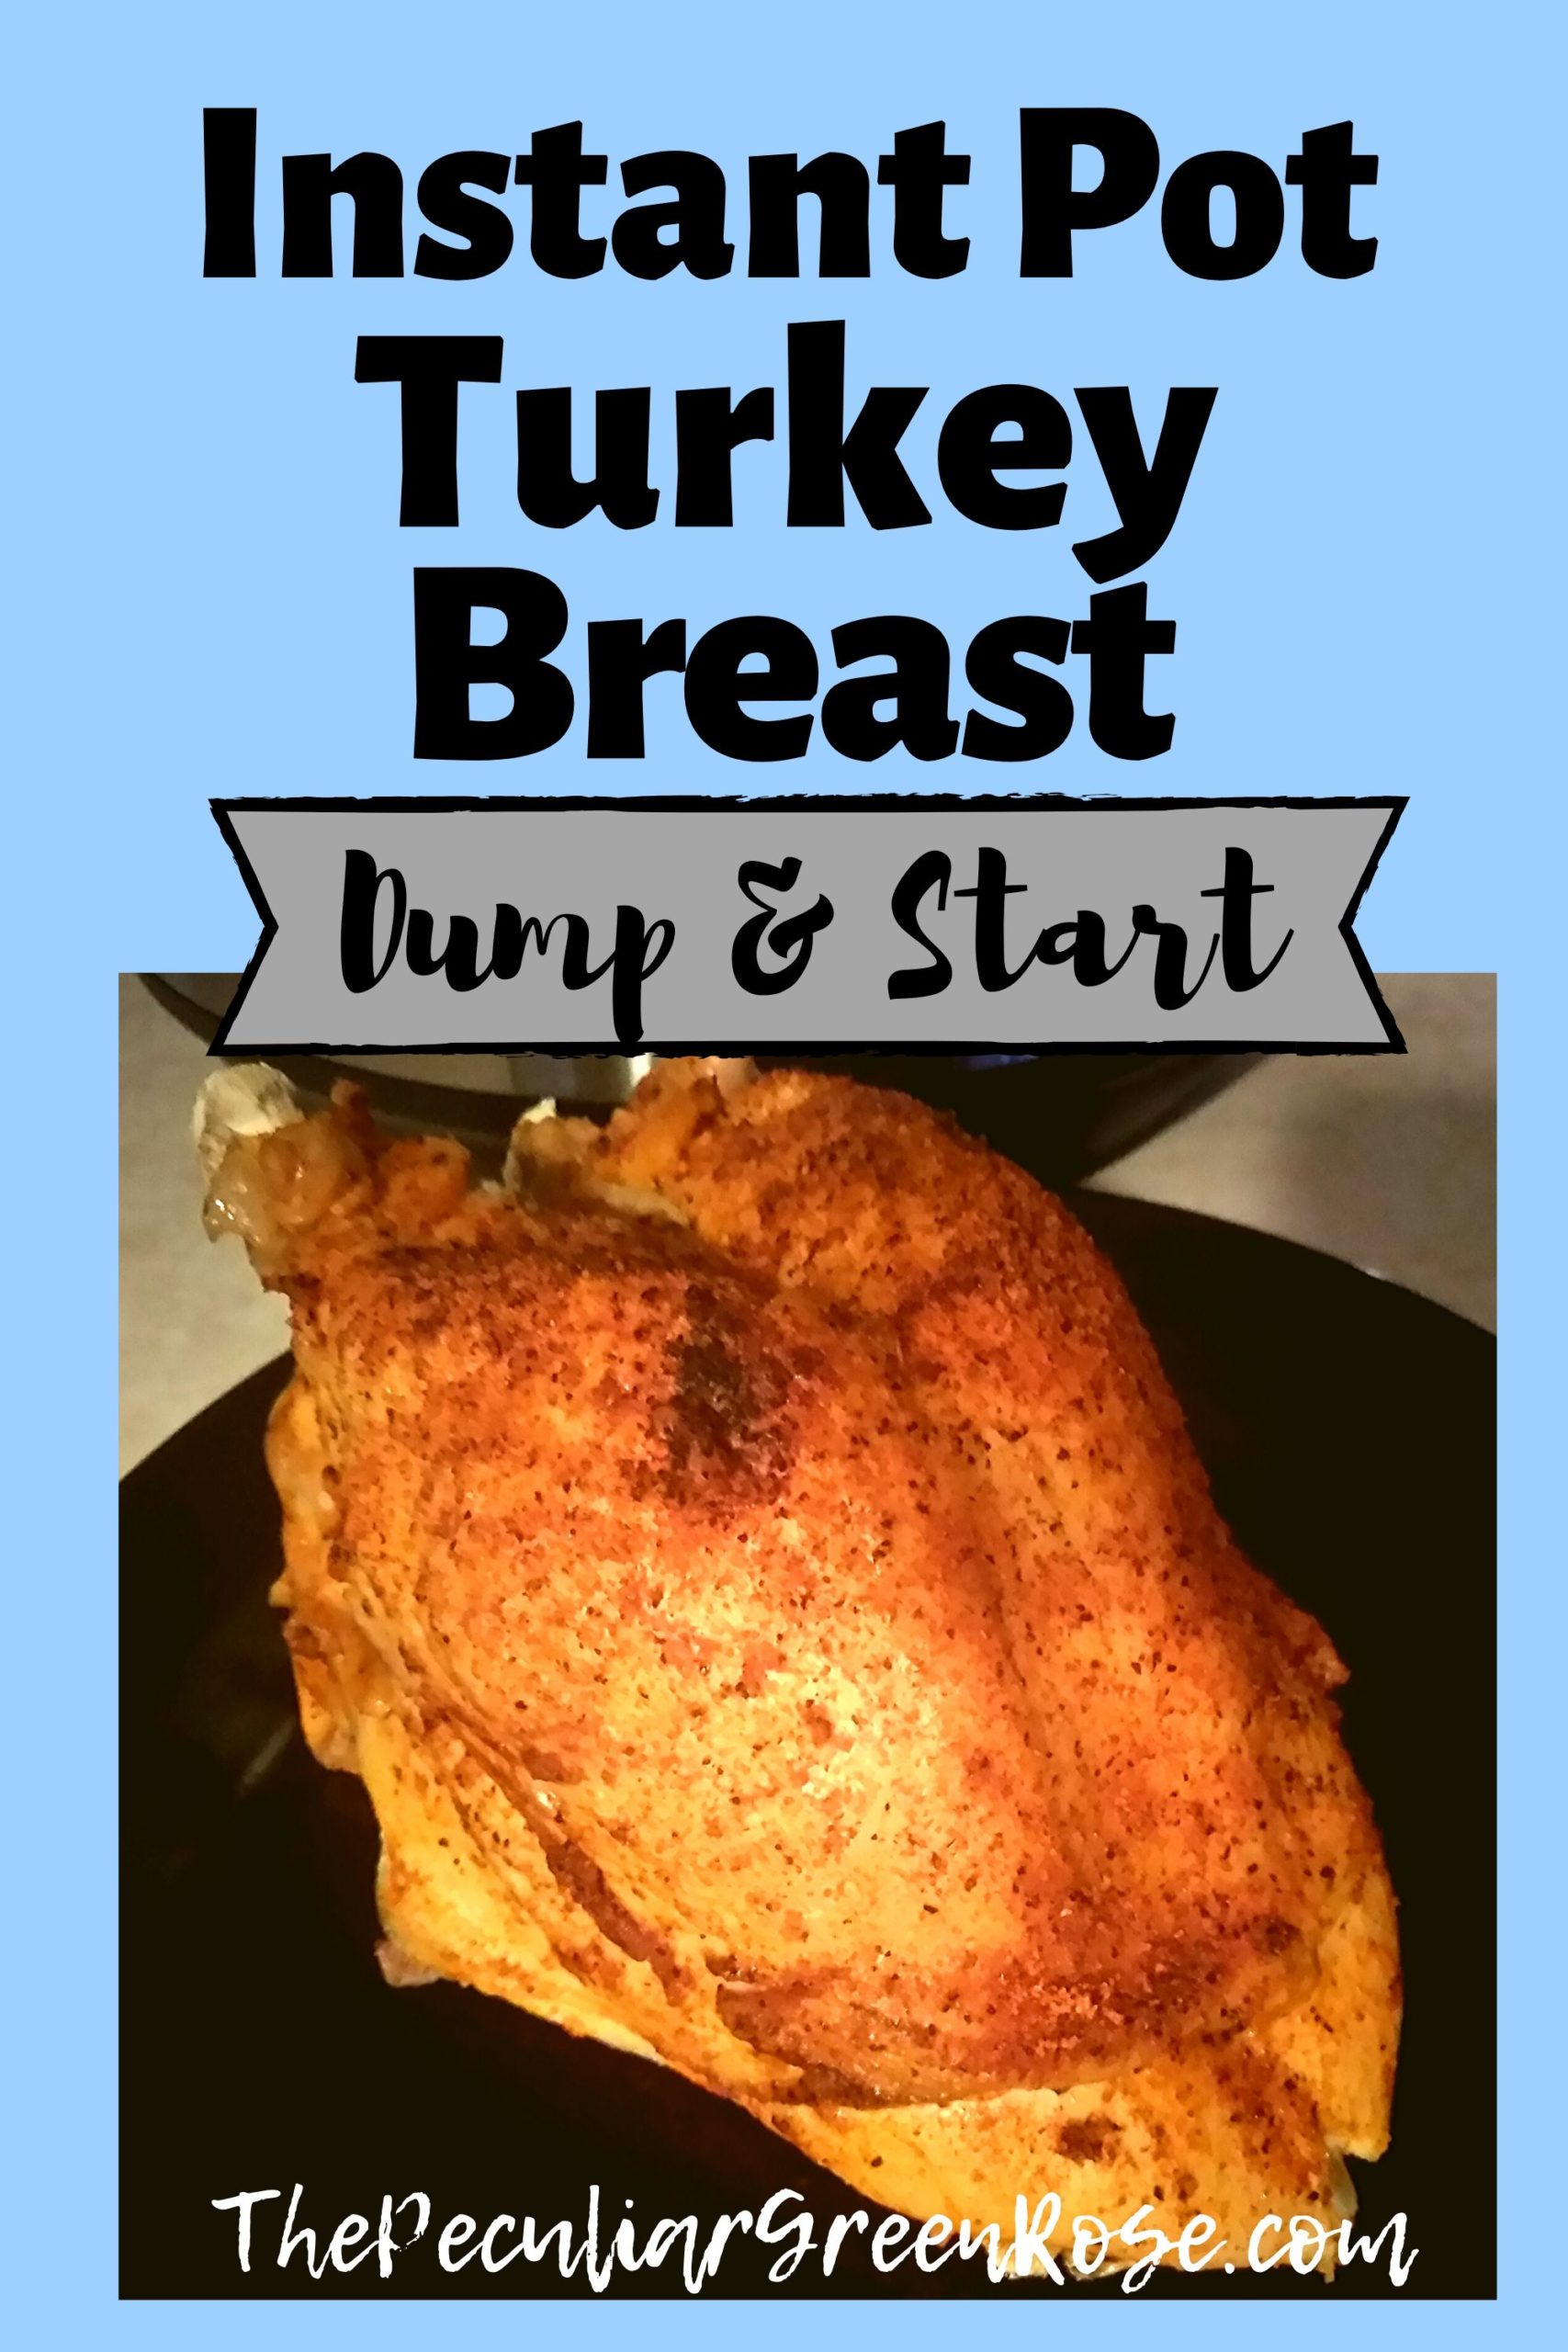 A black plate with a Instant Pot Turkey breast on it and sitting in front of an Instant Pot.